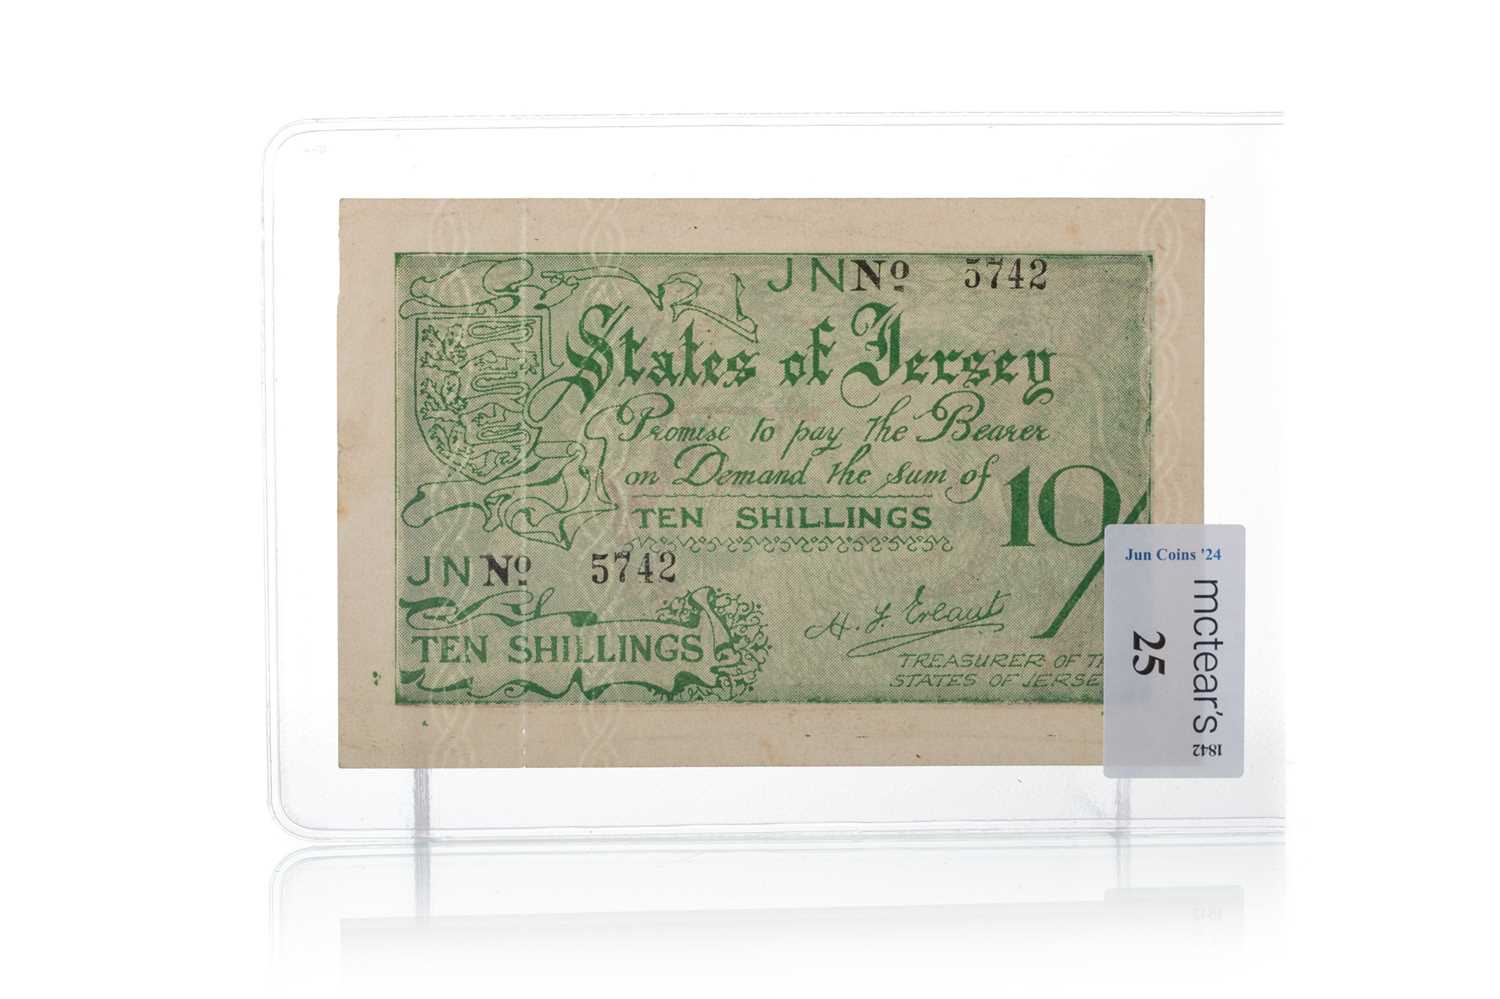 Lot 25 - WWII STATES OF JERSEY TEN SHILLING BANKNOTE